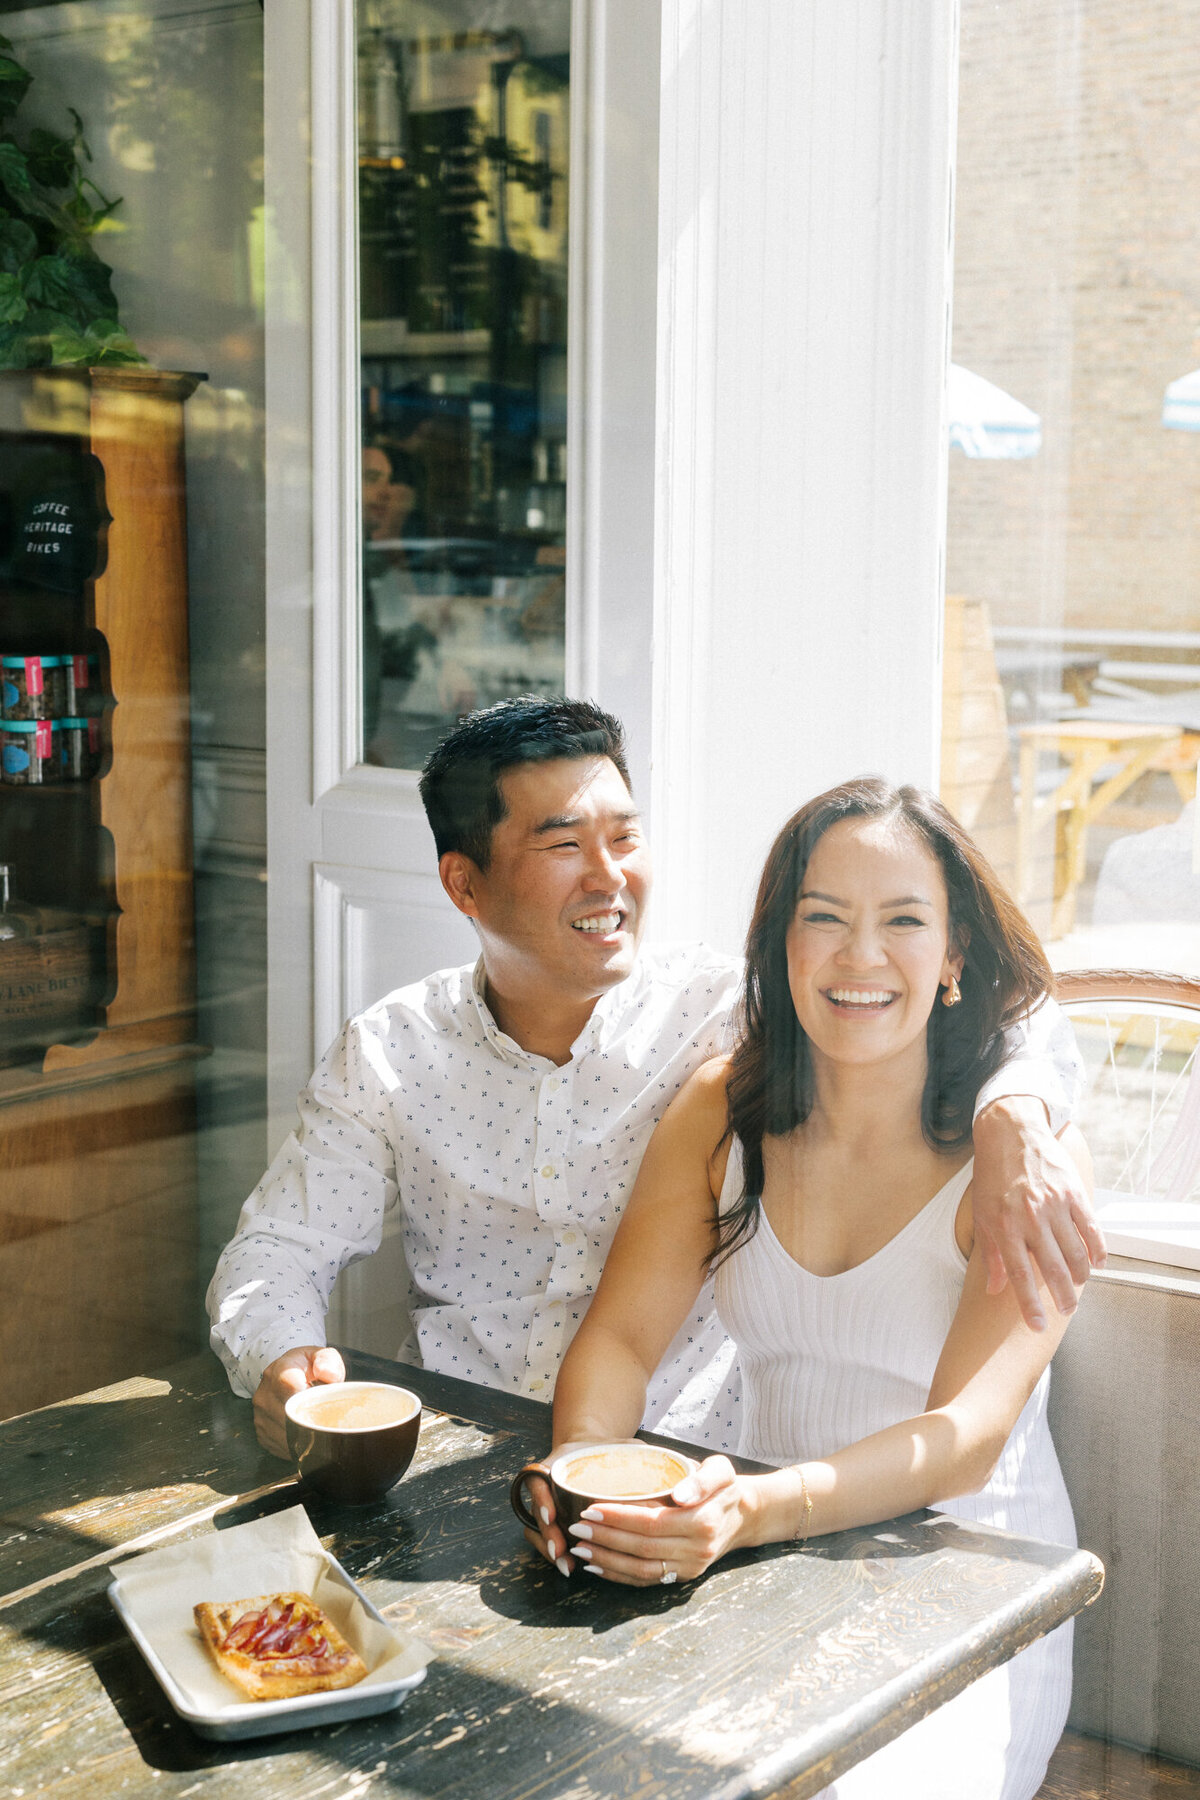 Engagement photos at Heritage Coffee Shop in Chicago